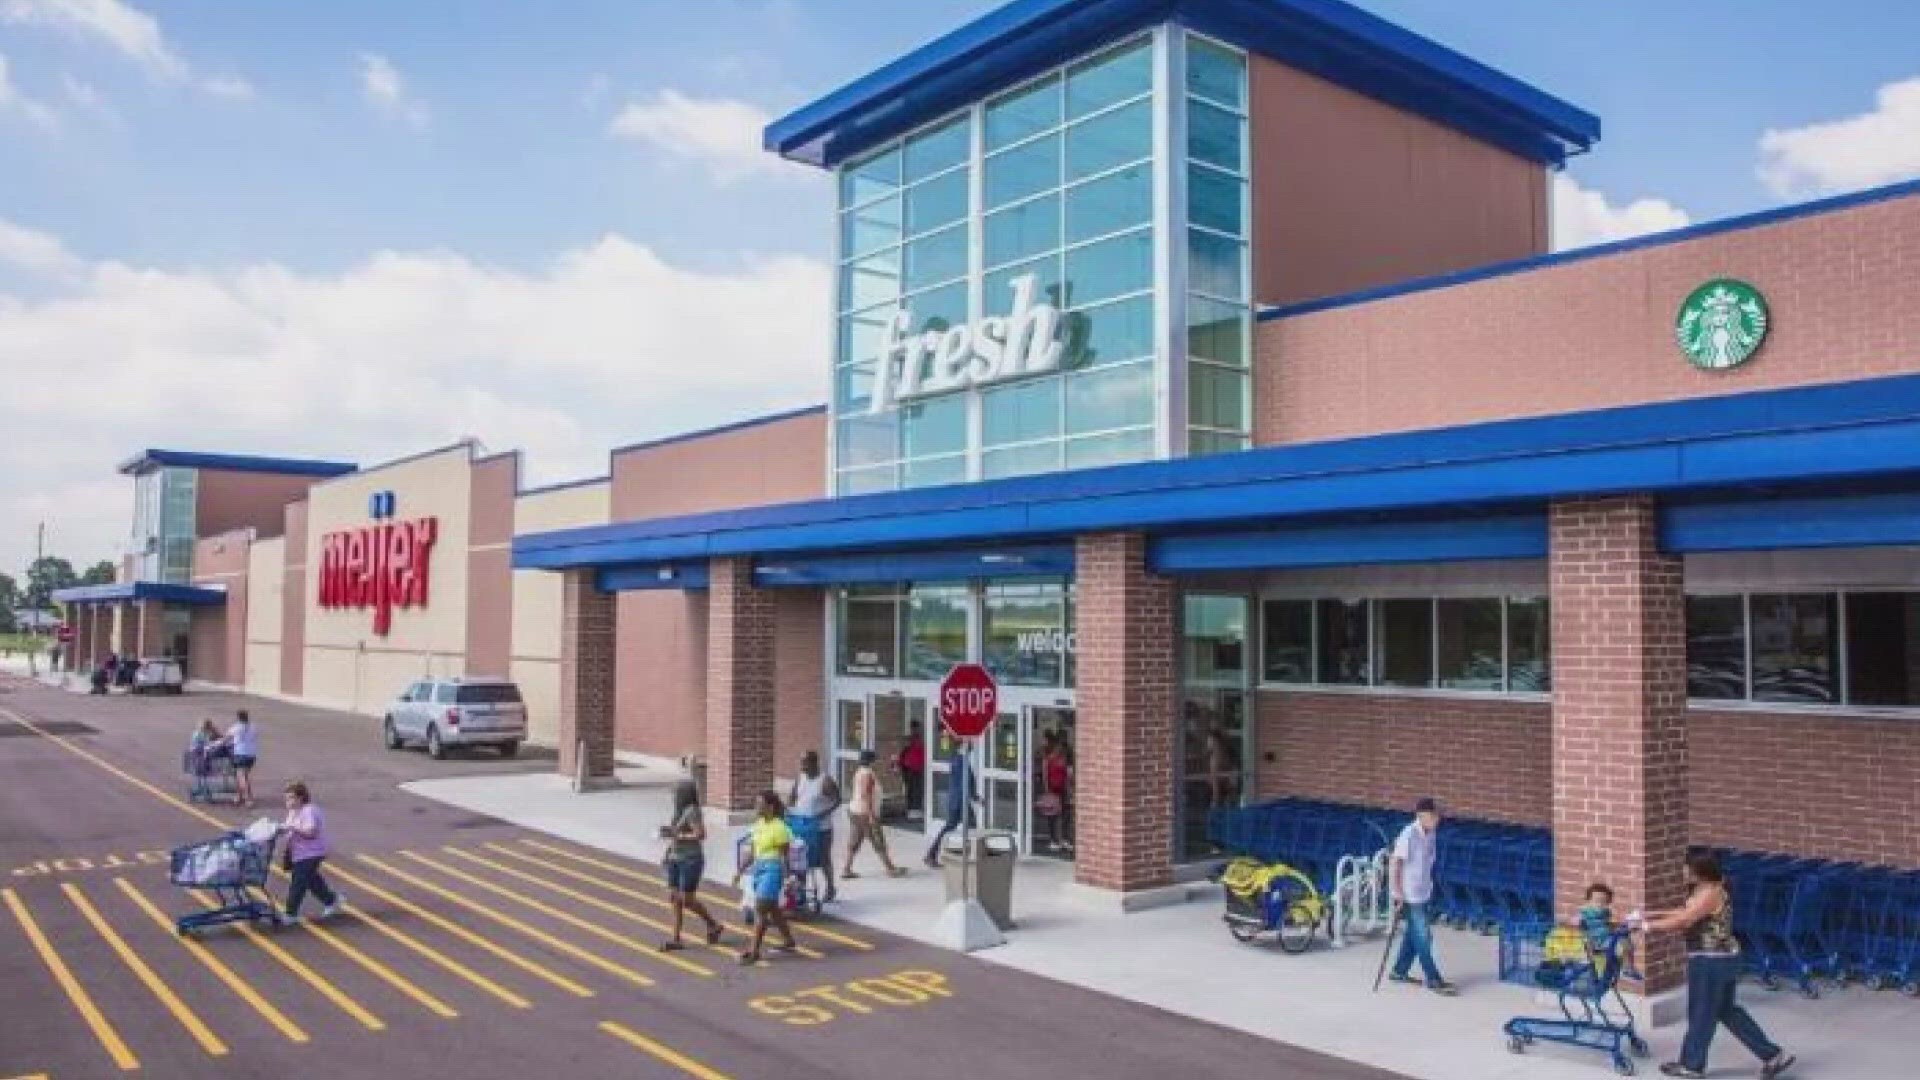 Michigan-based supermarket chain Meijer is set to open two new stores in North Canton and Alliance.